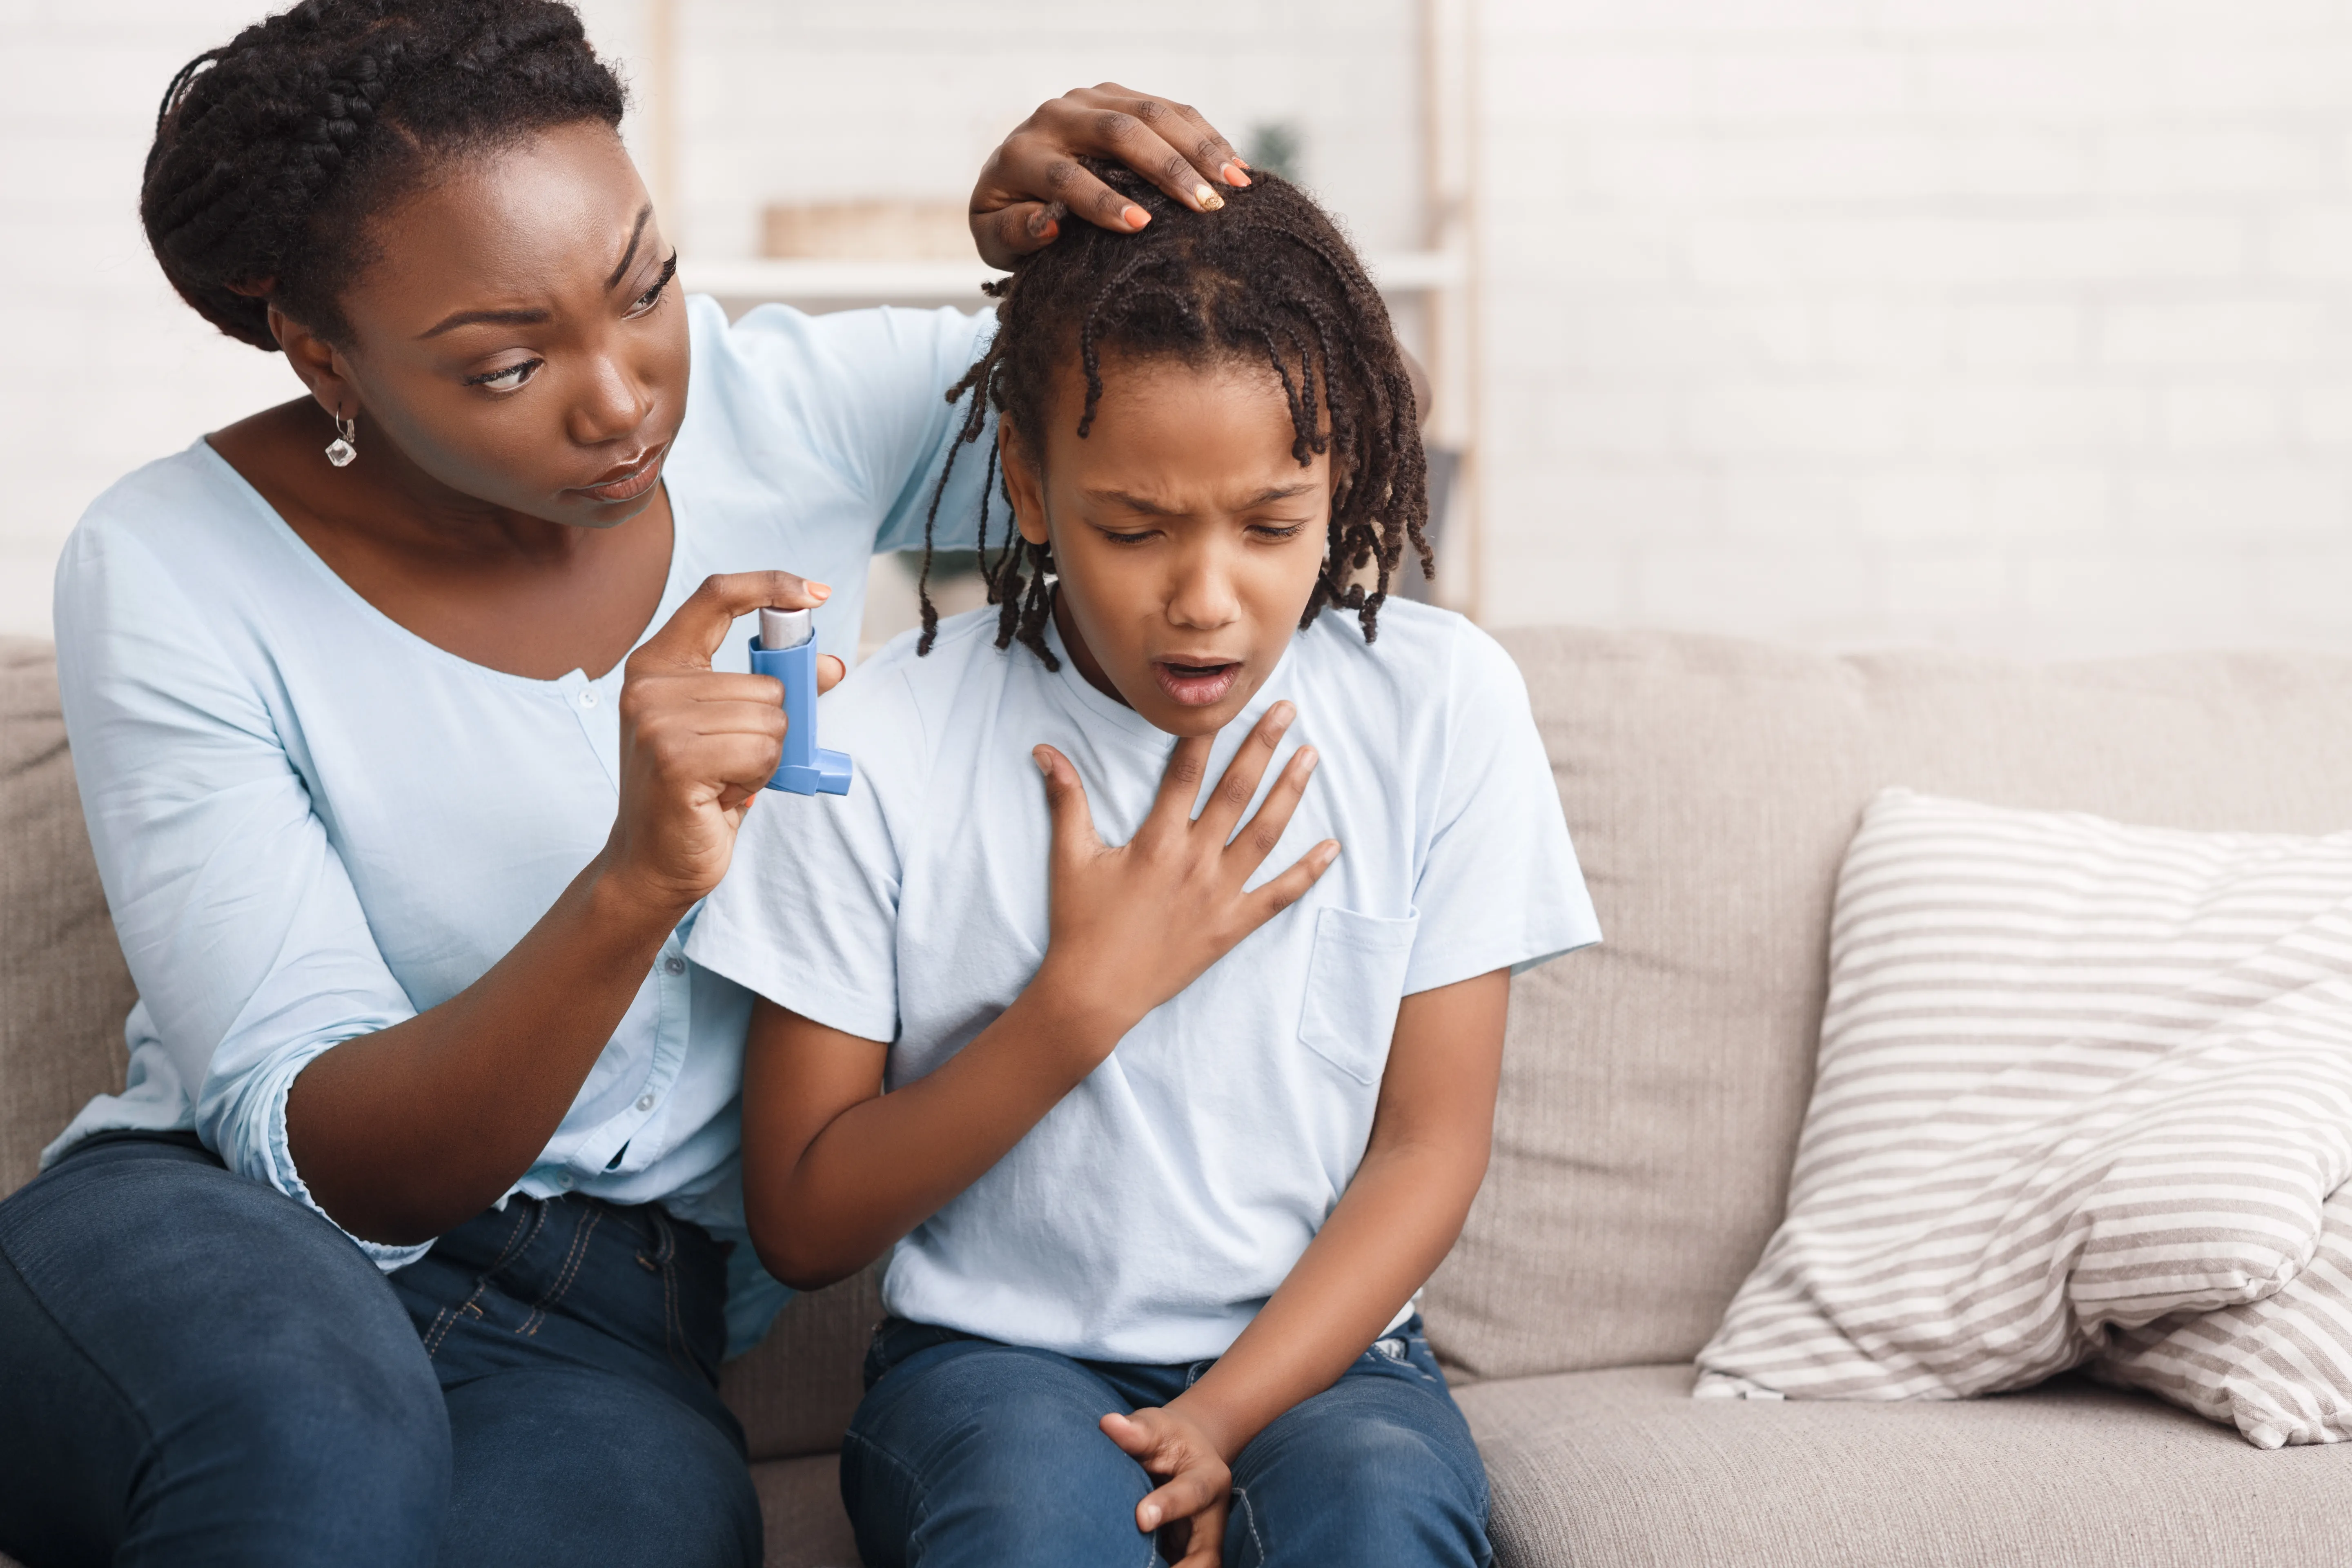 How To Identify If Your Child Has Asthma